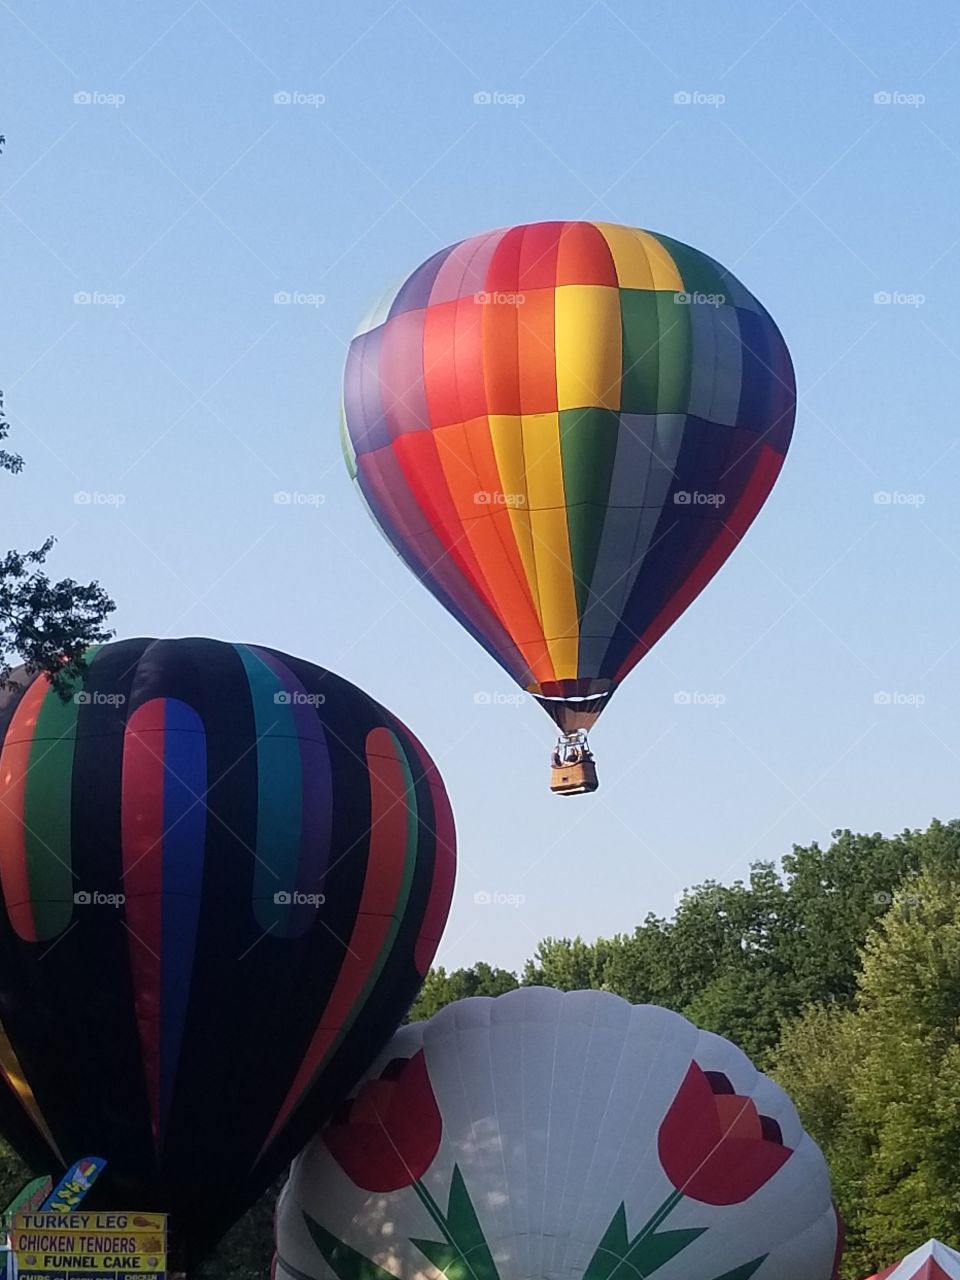 Hot Air Balloon Launch, at an Annual festival in Ny. I find something fascinating about seeing different stages of the balloons.